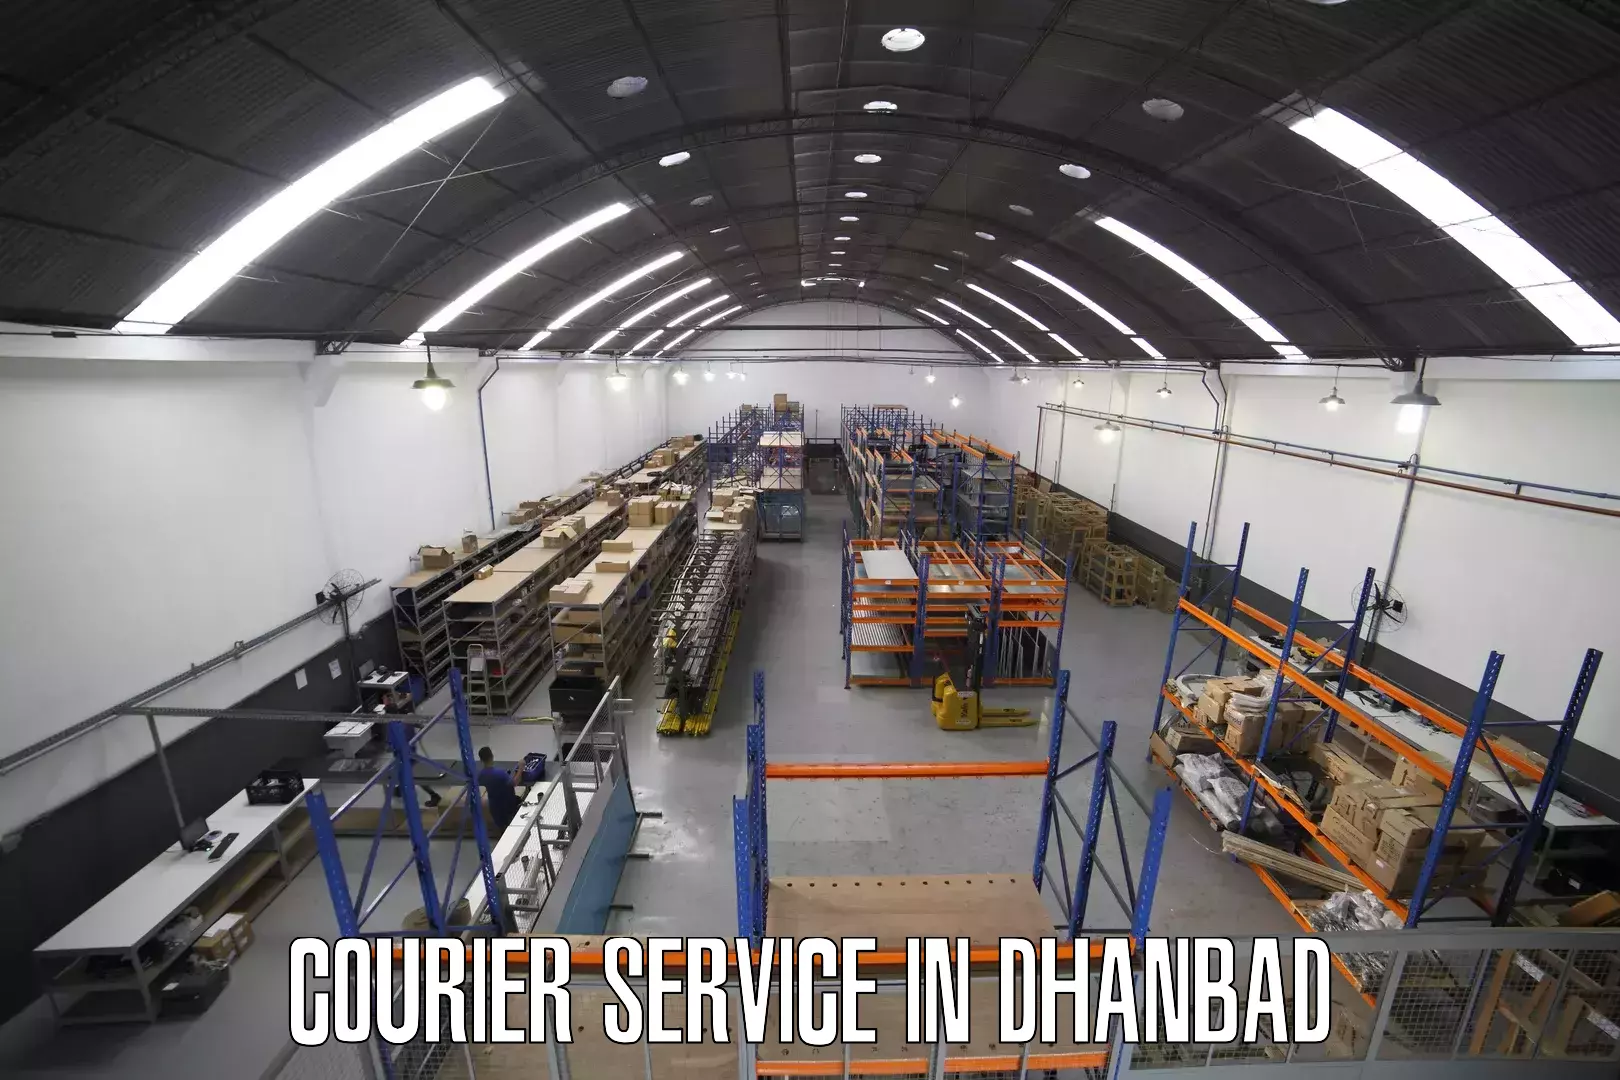 Same-day delivery options in Dhanbad